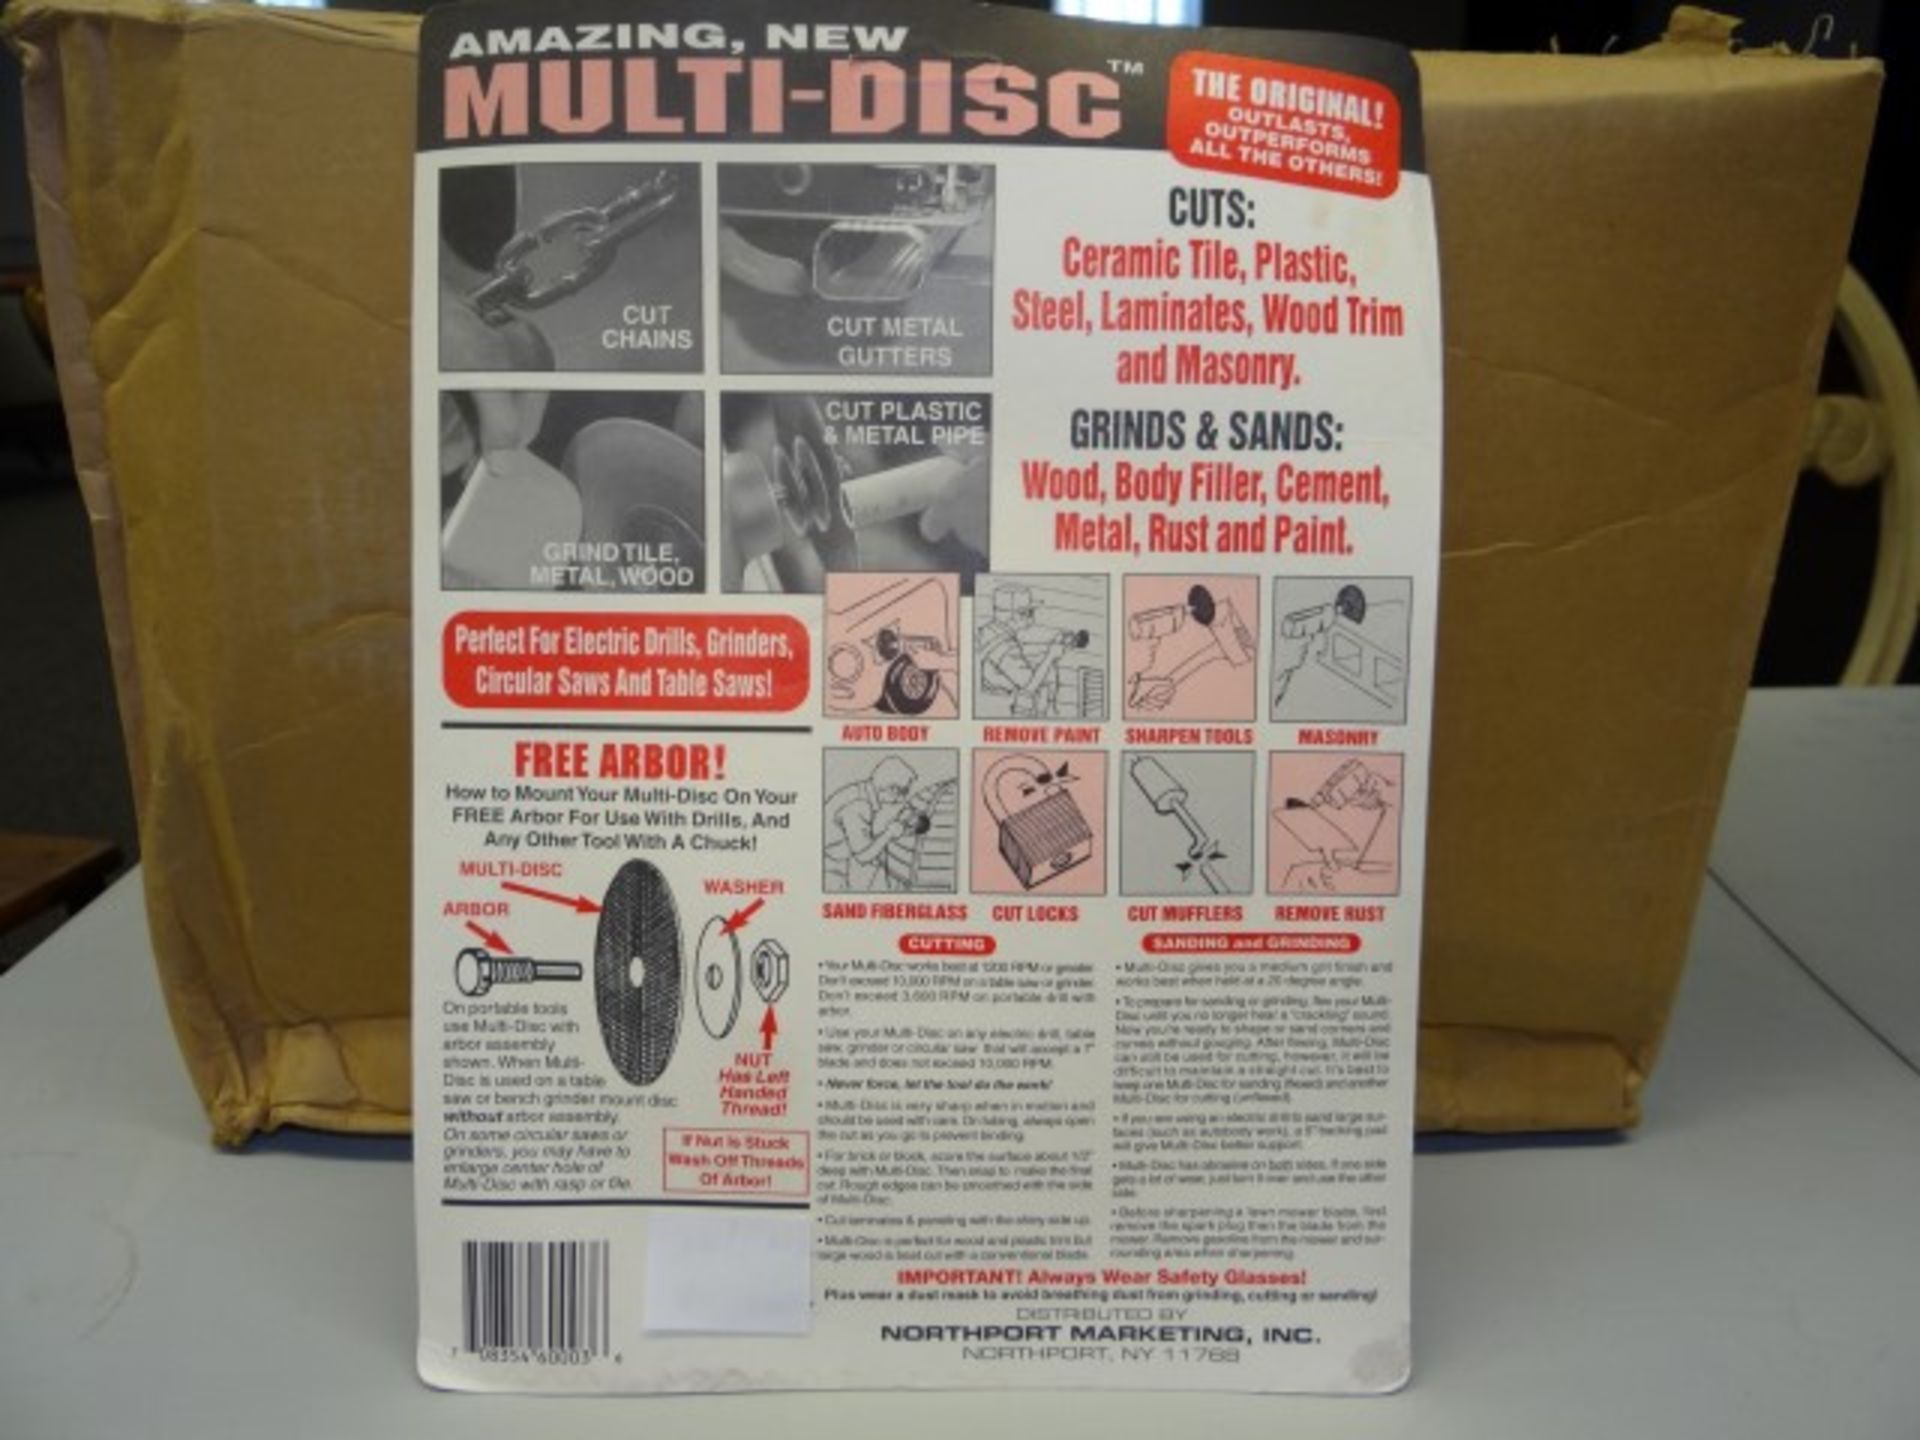 7" Aluminum Oxide Grinding and Cut Off Discs. 12 Blister Packs/Case with 2 Disks Per Pack with Arbor - Image 2 of 3